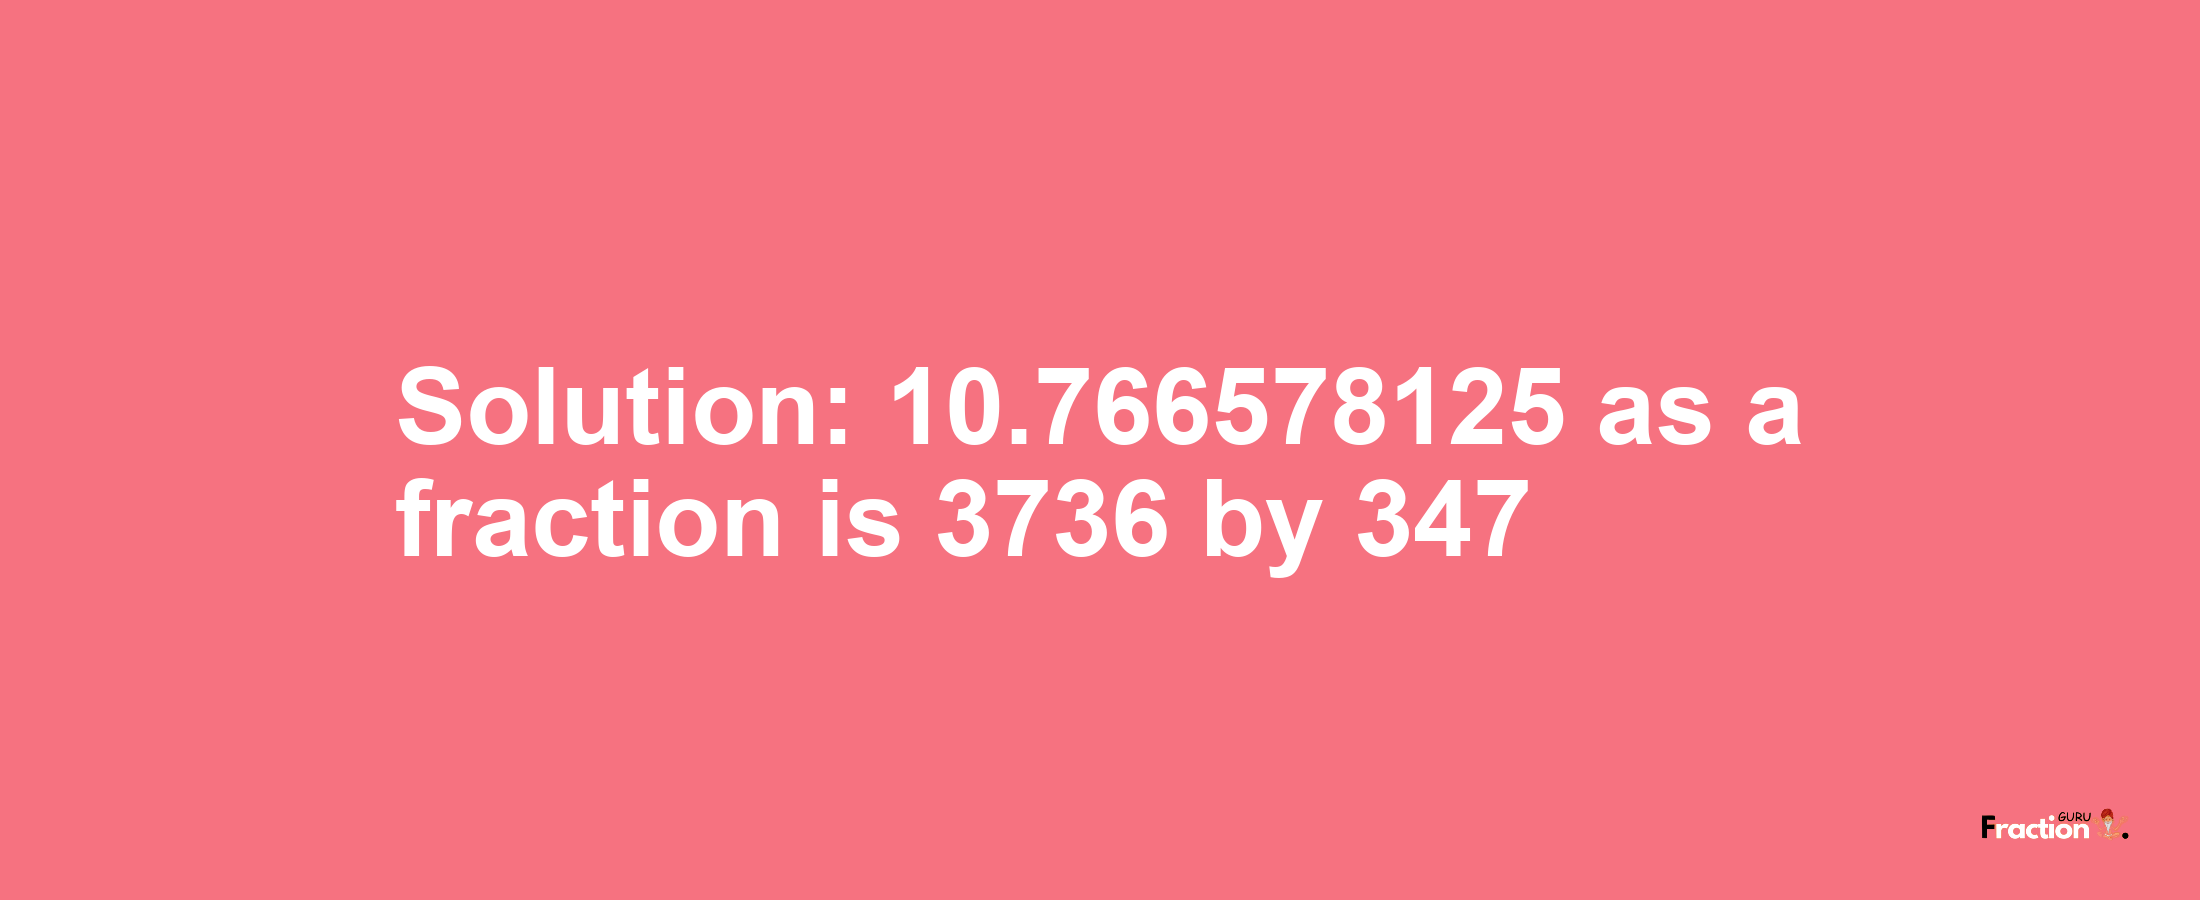 Solution:10.766578125 as a fraction is 3736/347